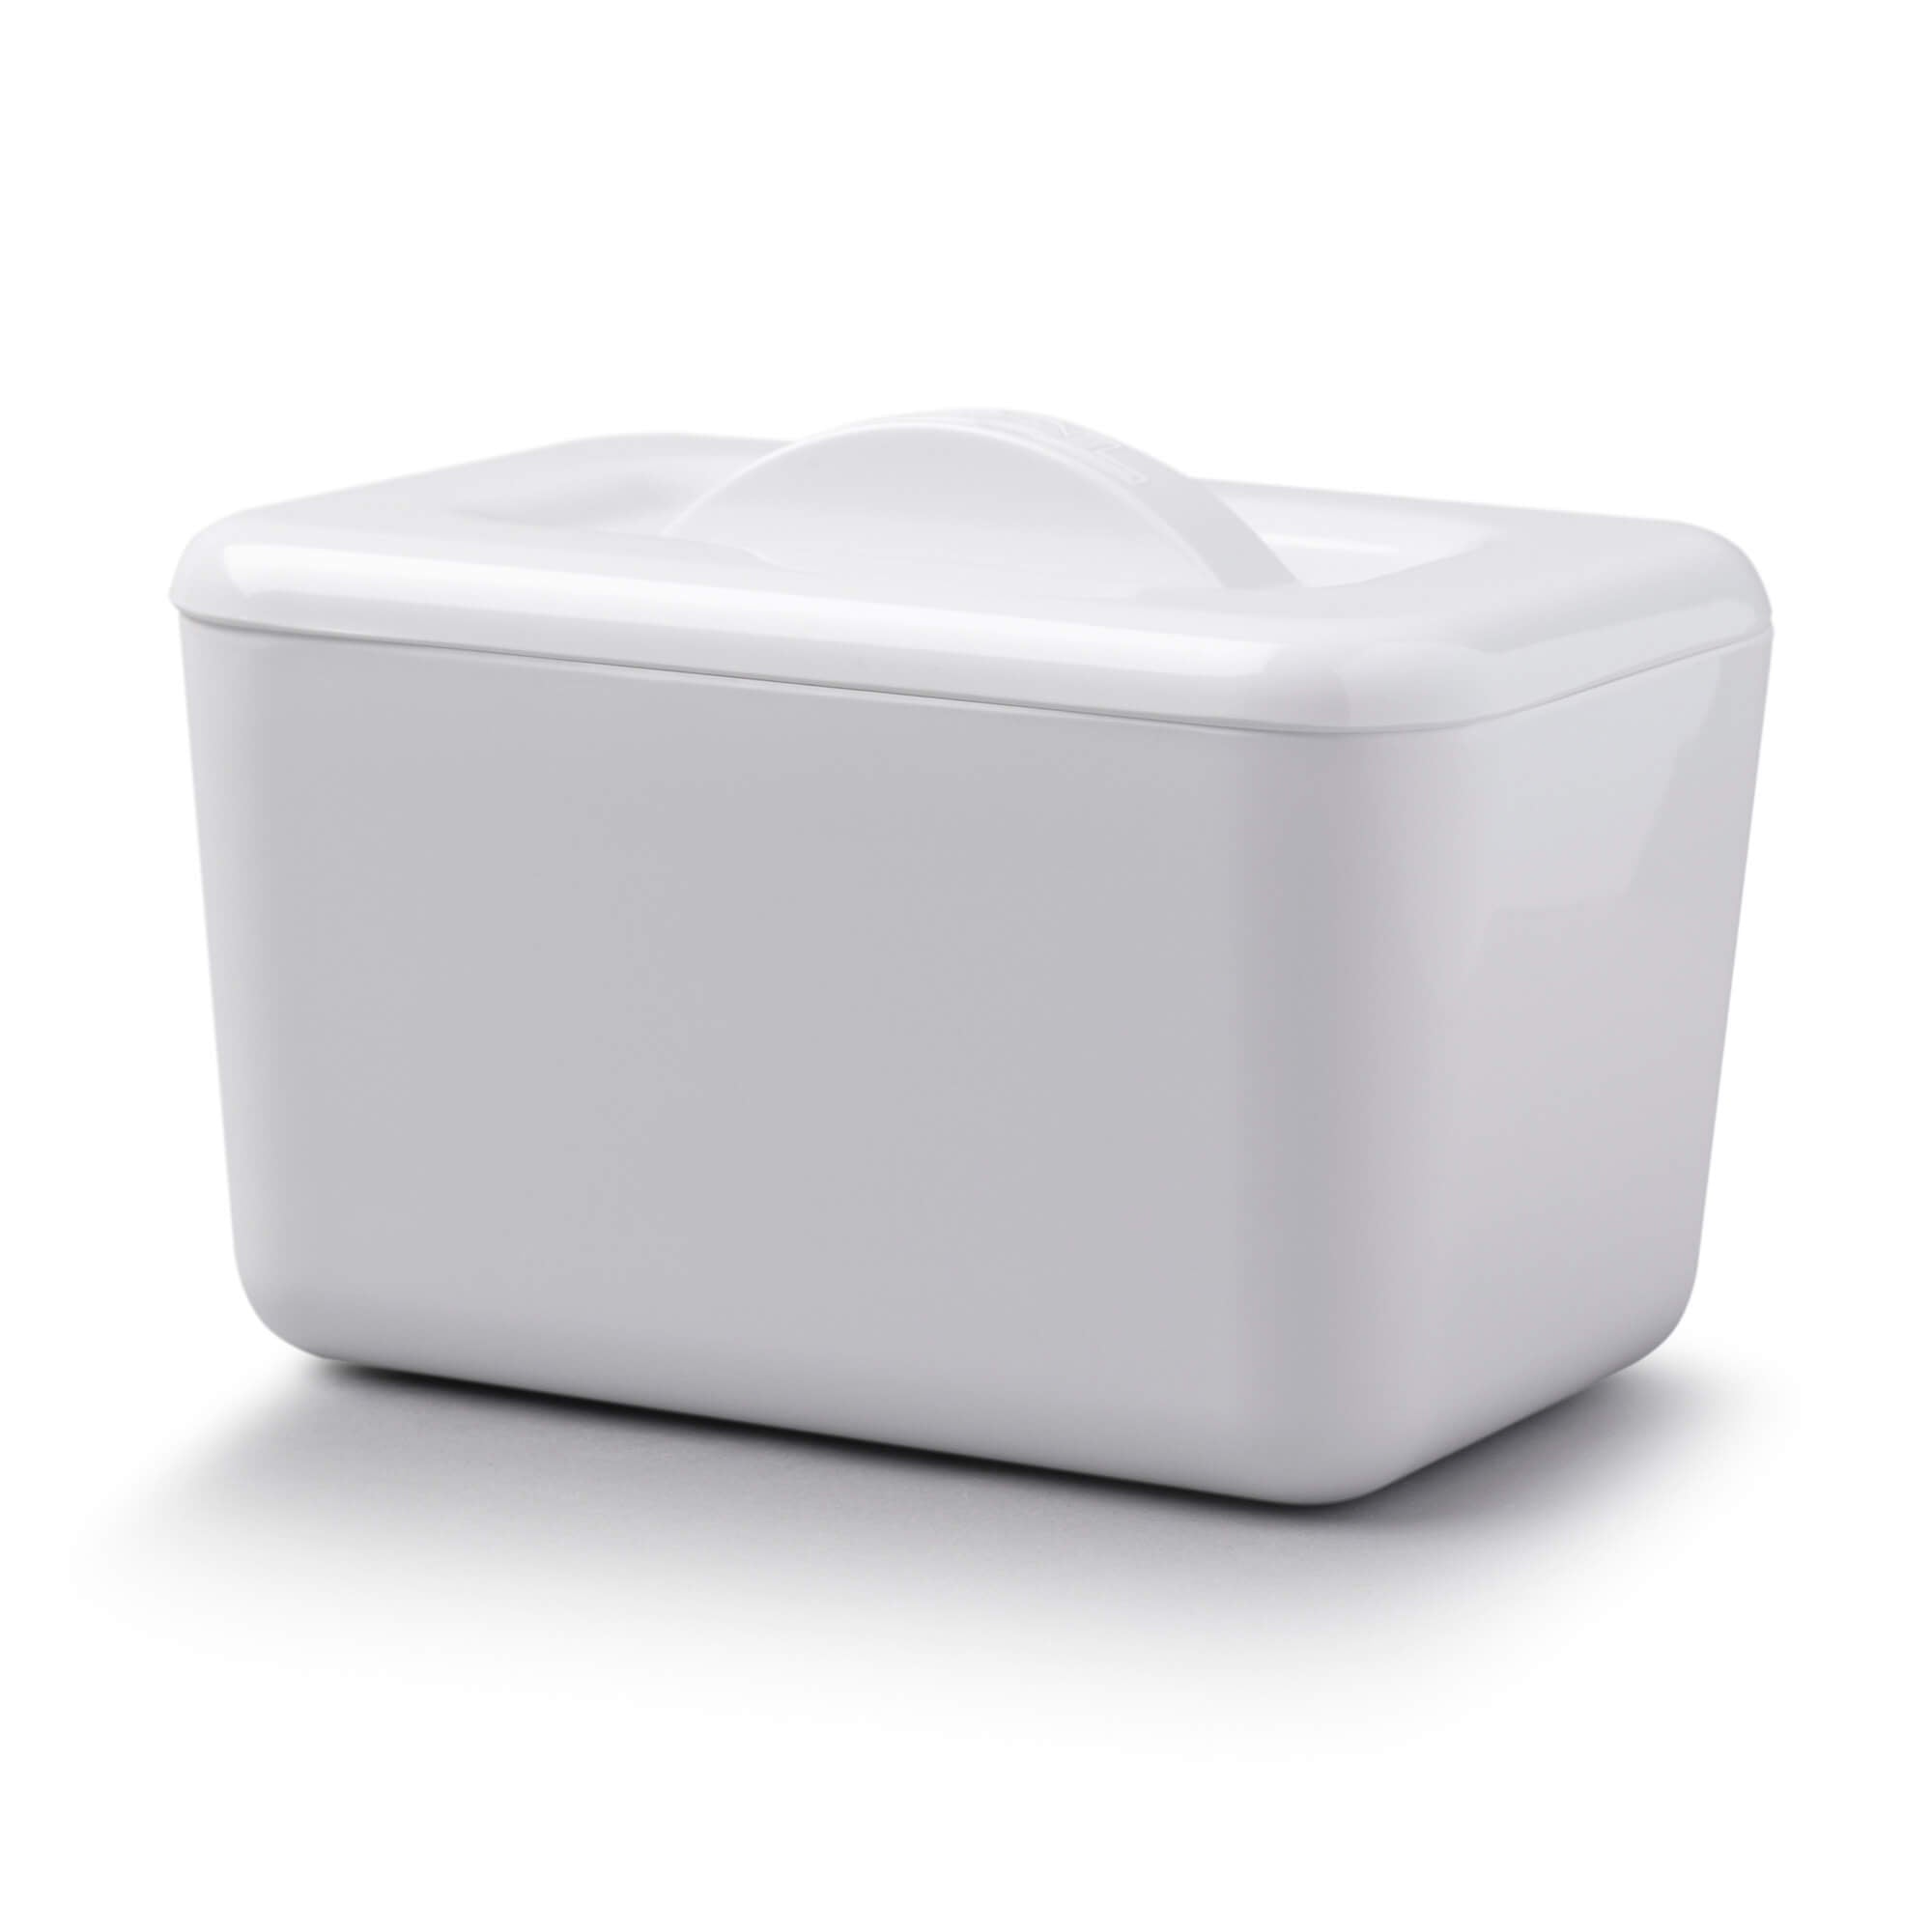 White Melamine Butter Dish by Zeal